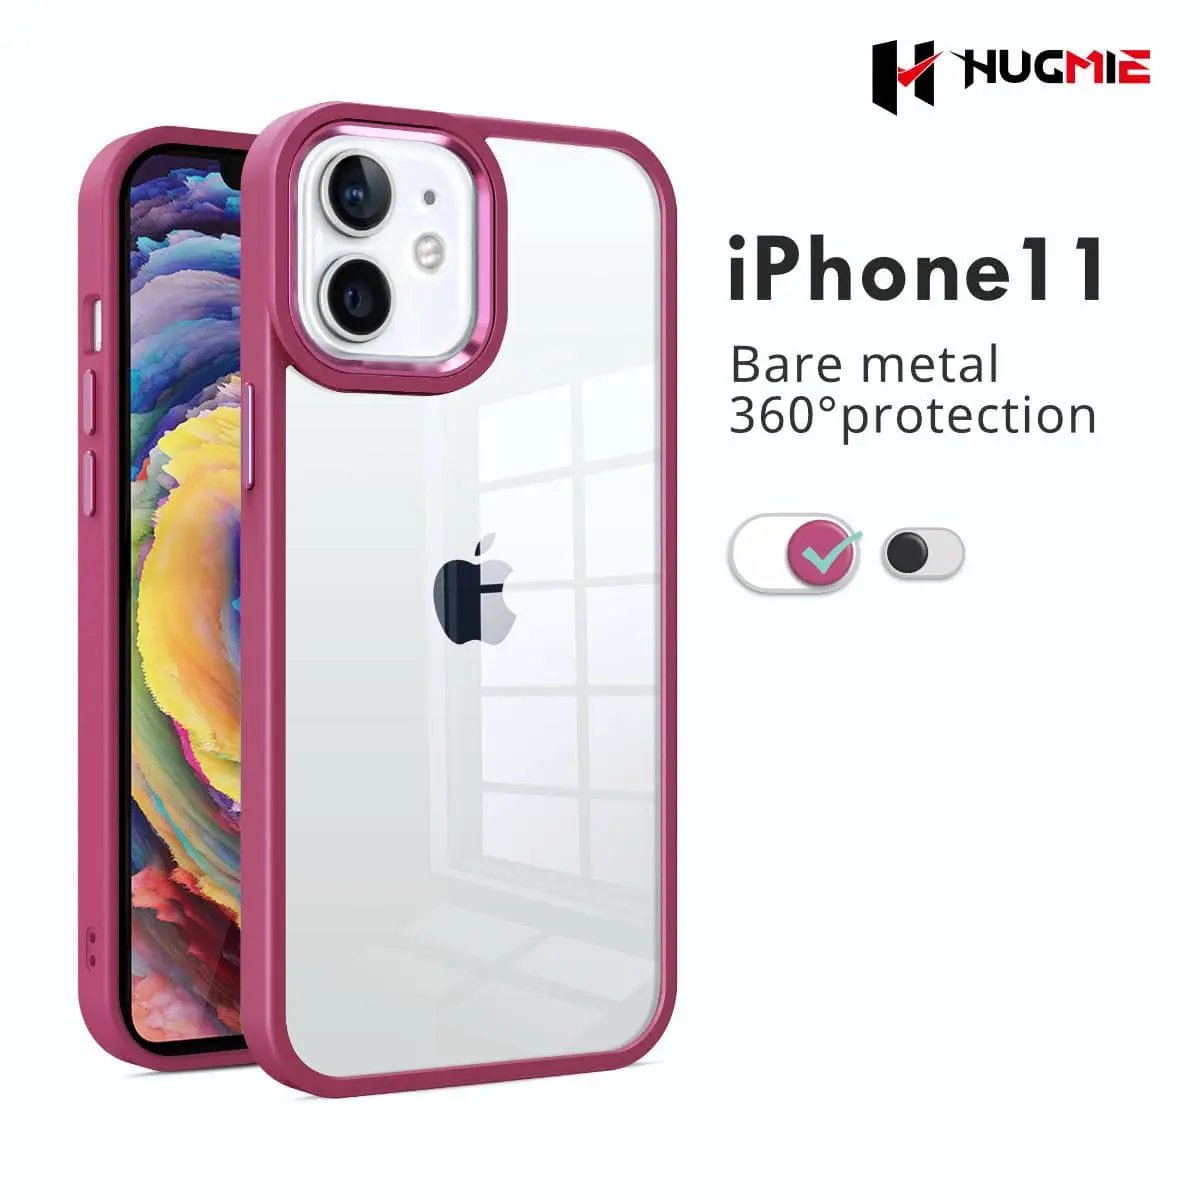 iPhone 11 Clear Case Crystal Shield - Hugmie